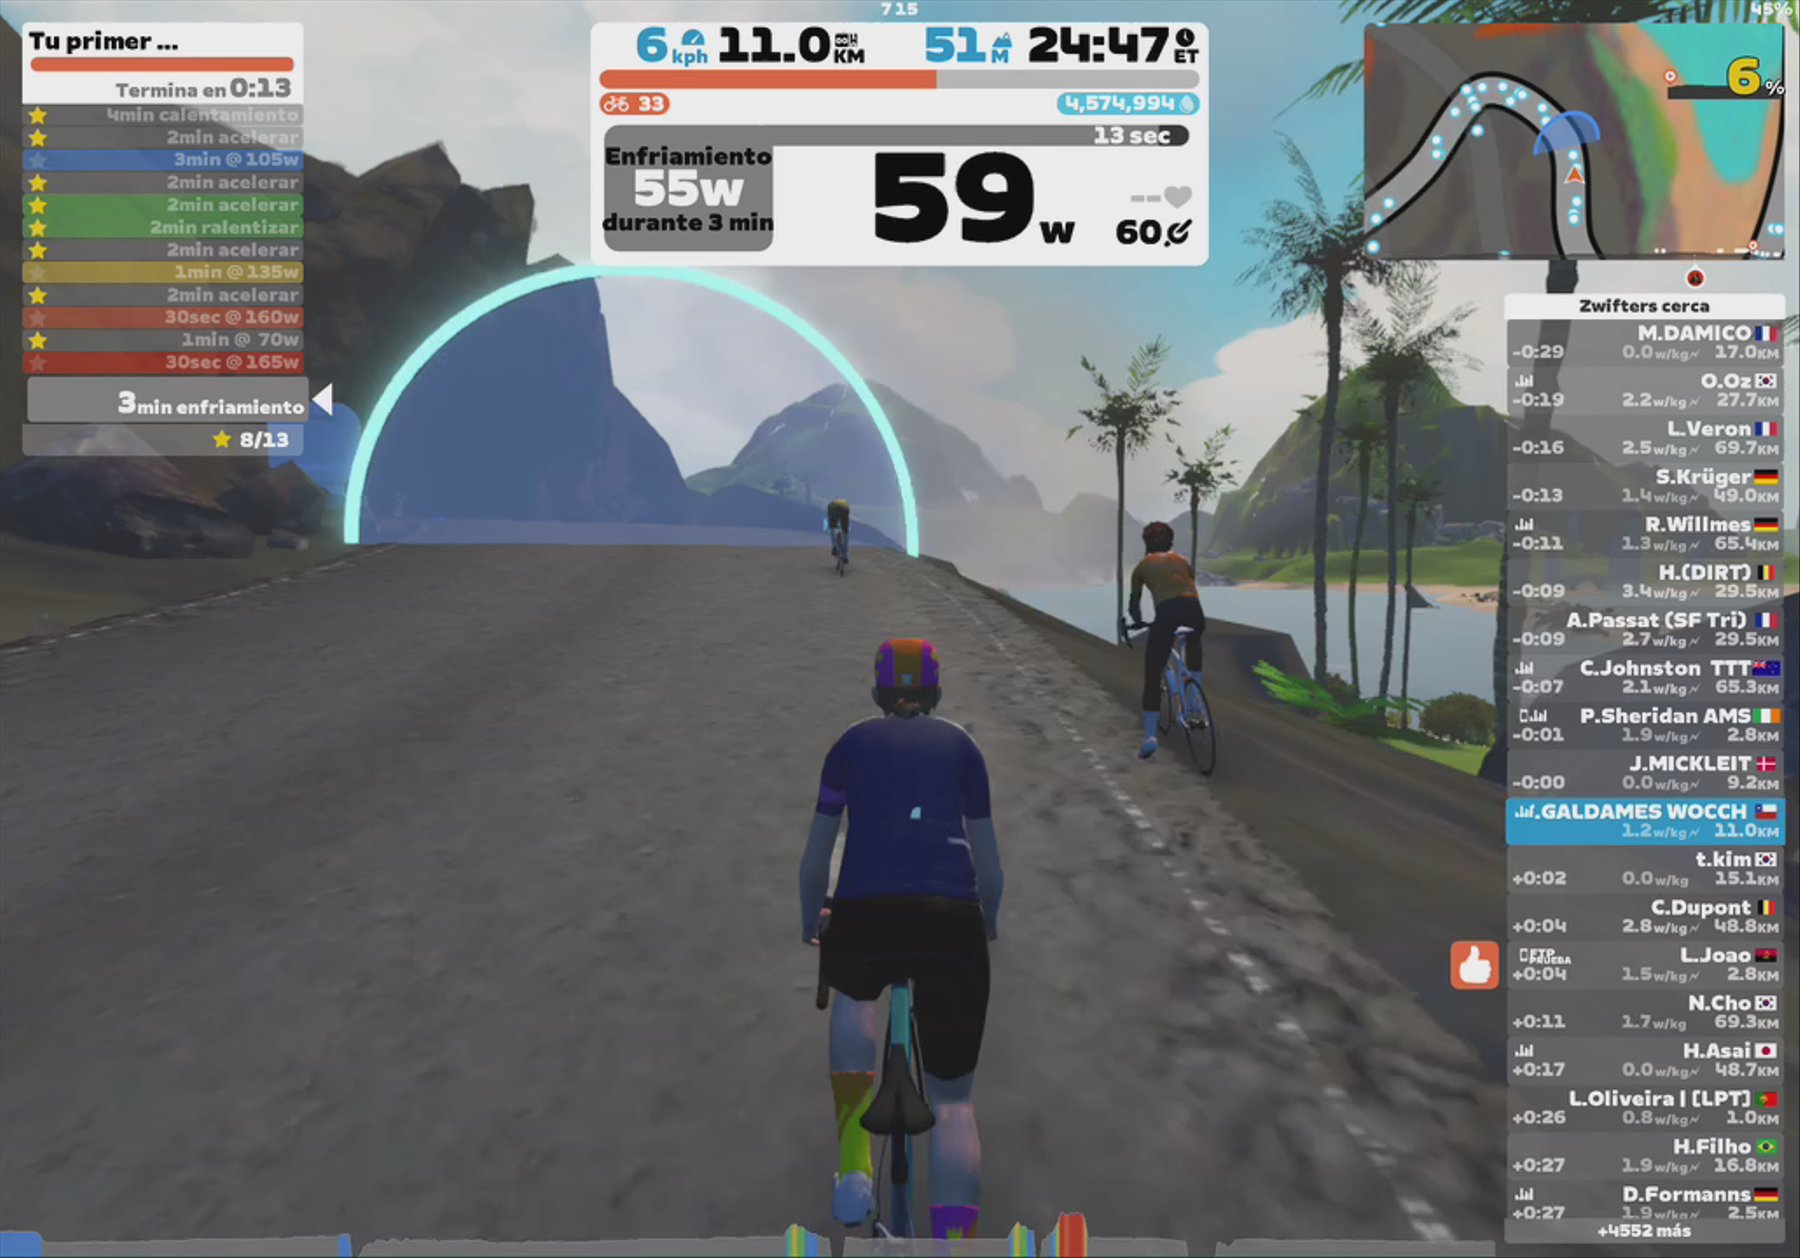 Zwift - Your First Workout on Volcano Circuit CCW in Watopia